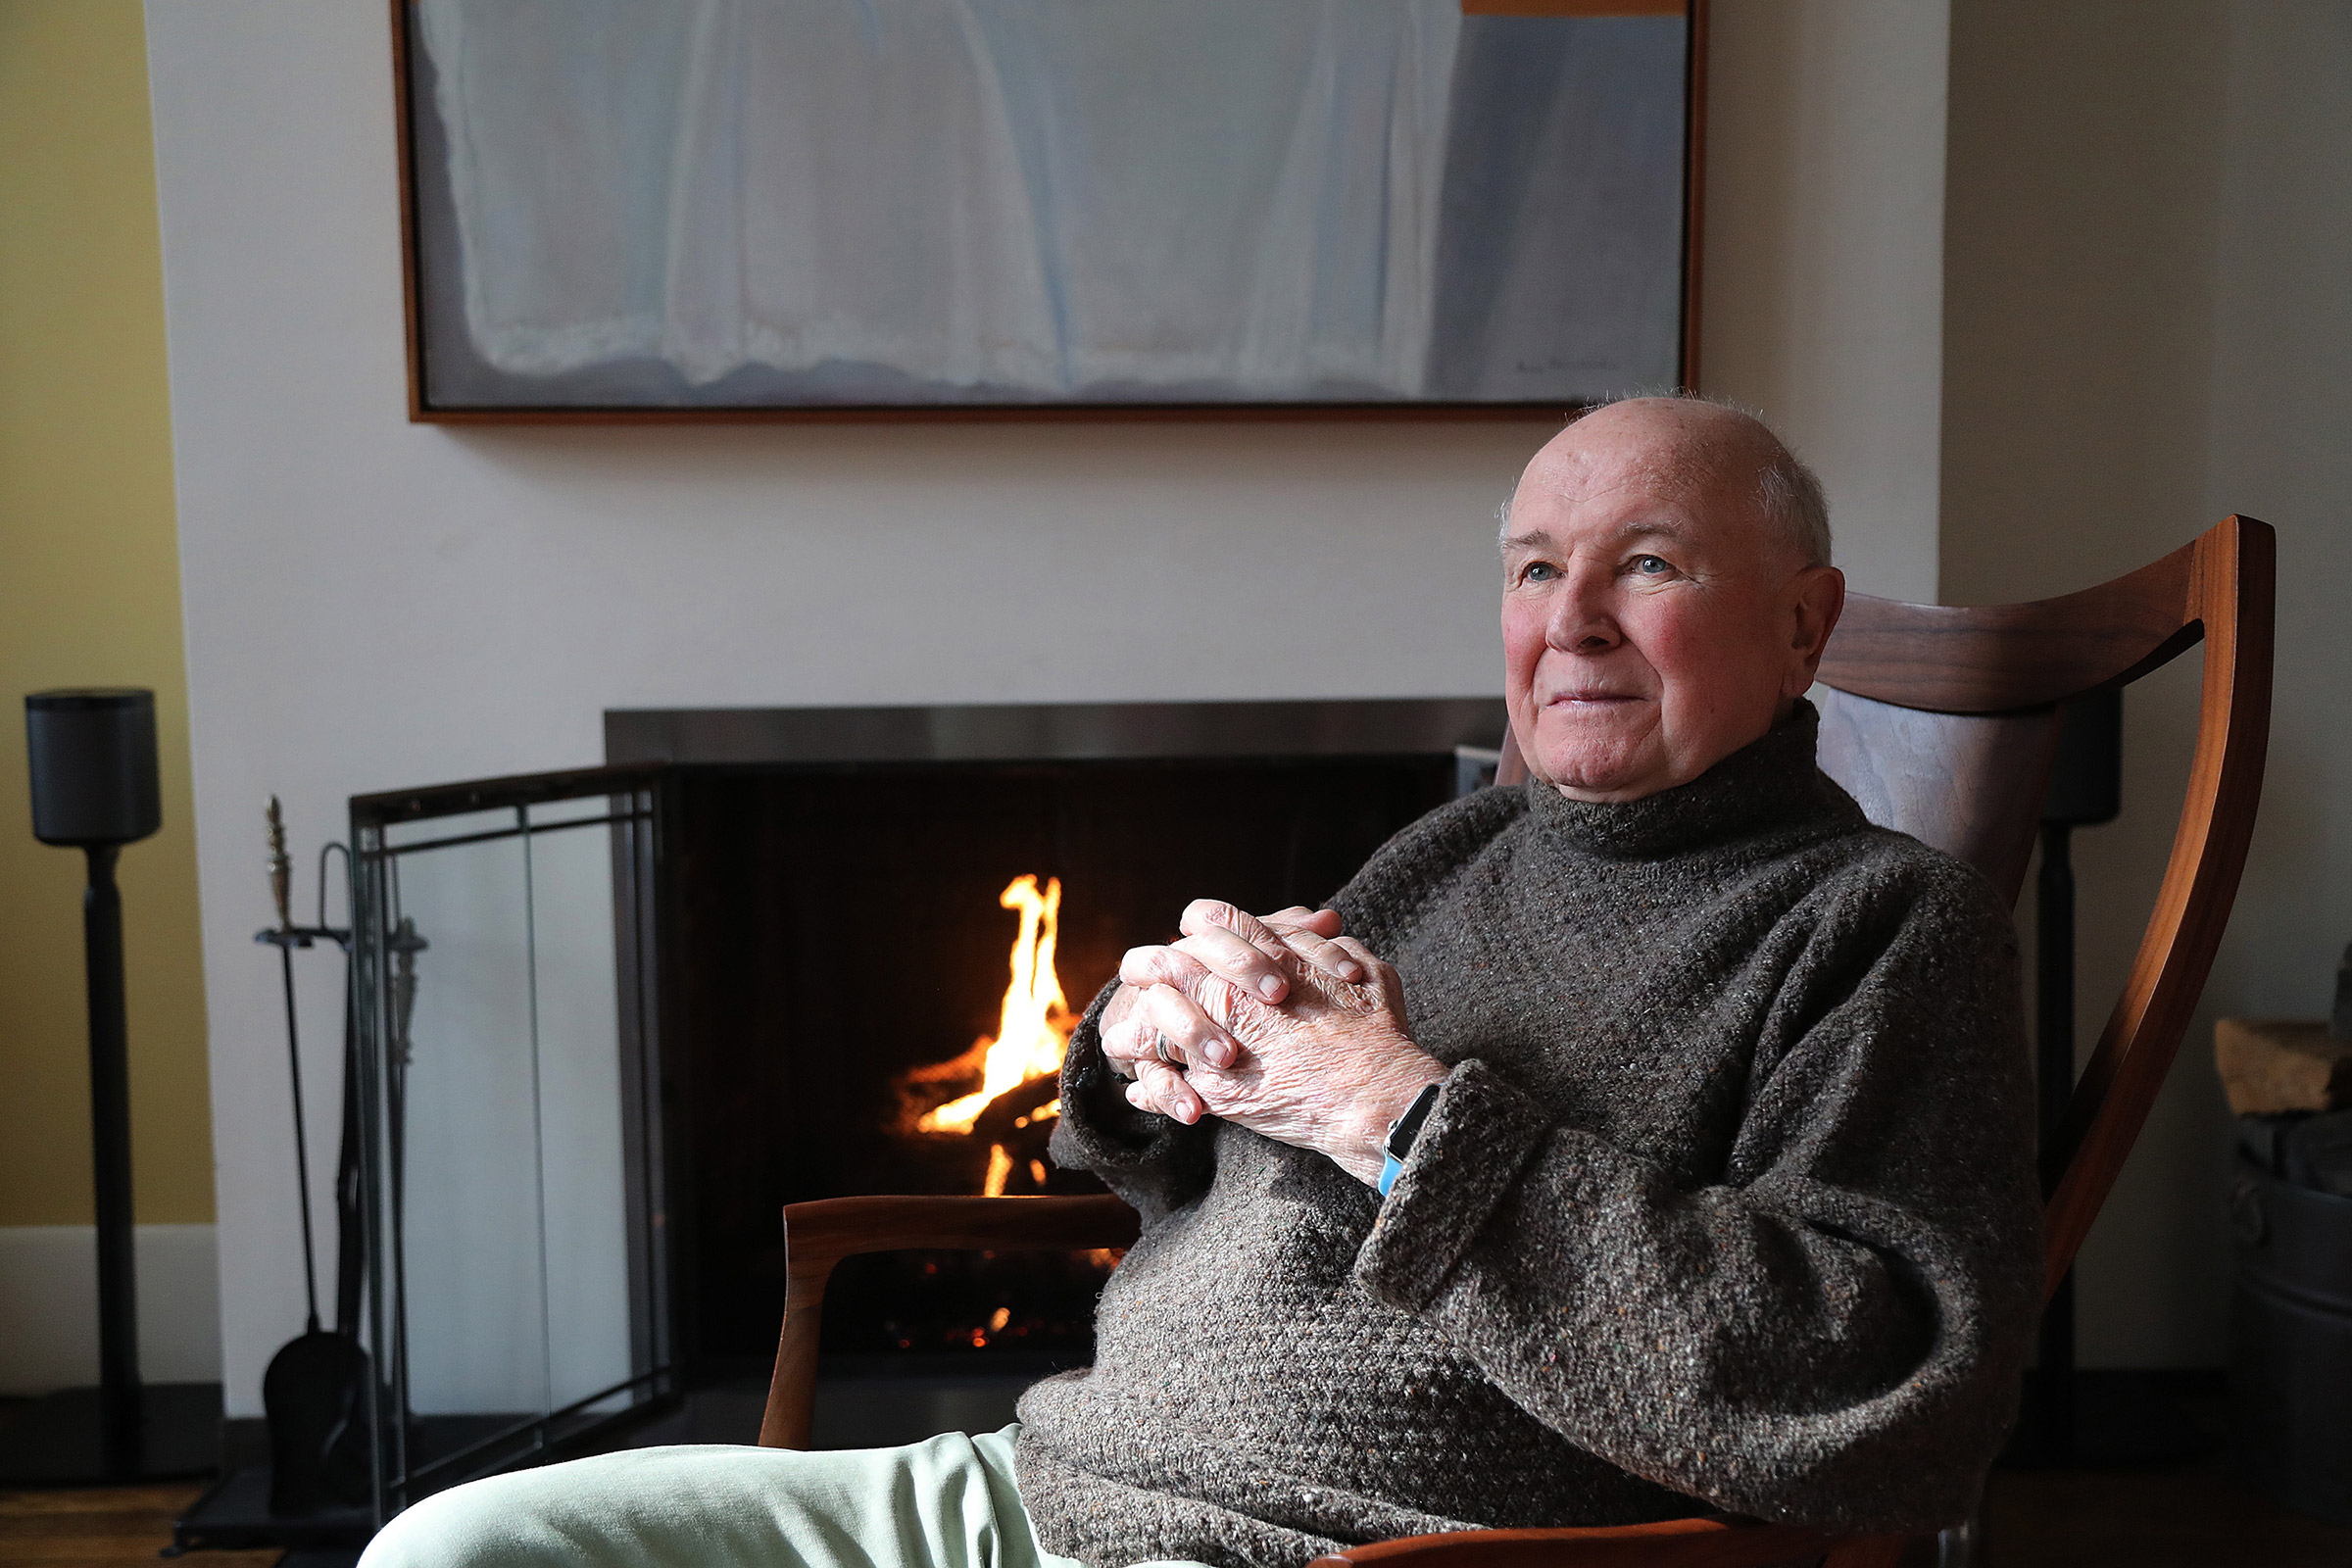 Playwright Terrence McNally in his home on March 2, 2020 in New York City. (Al Pereira—Getty Images)